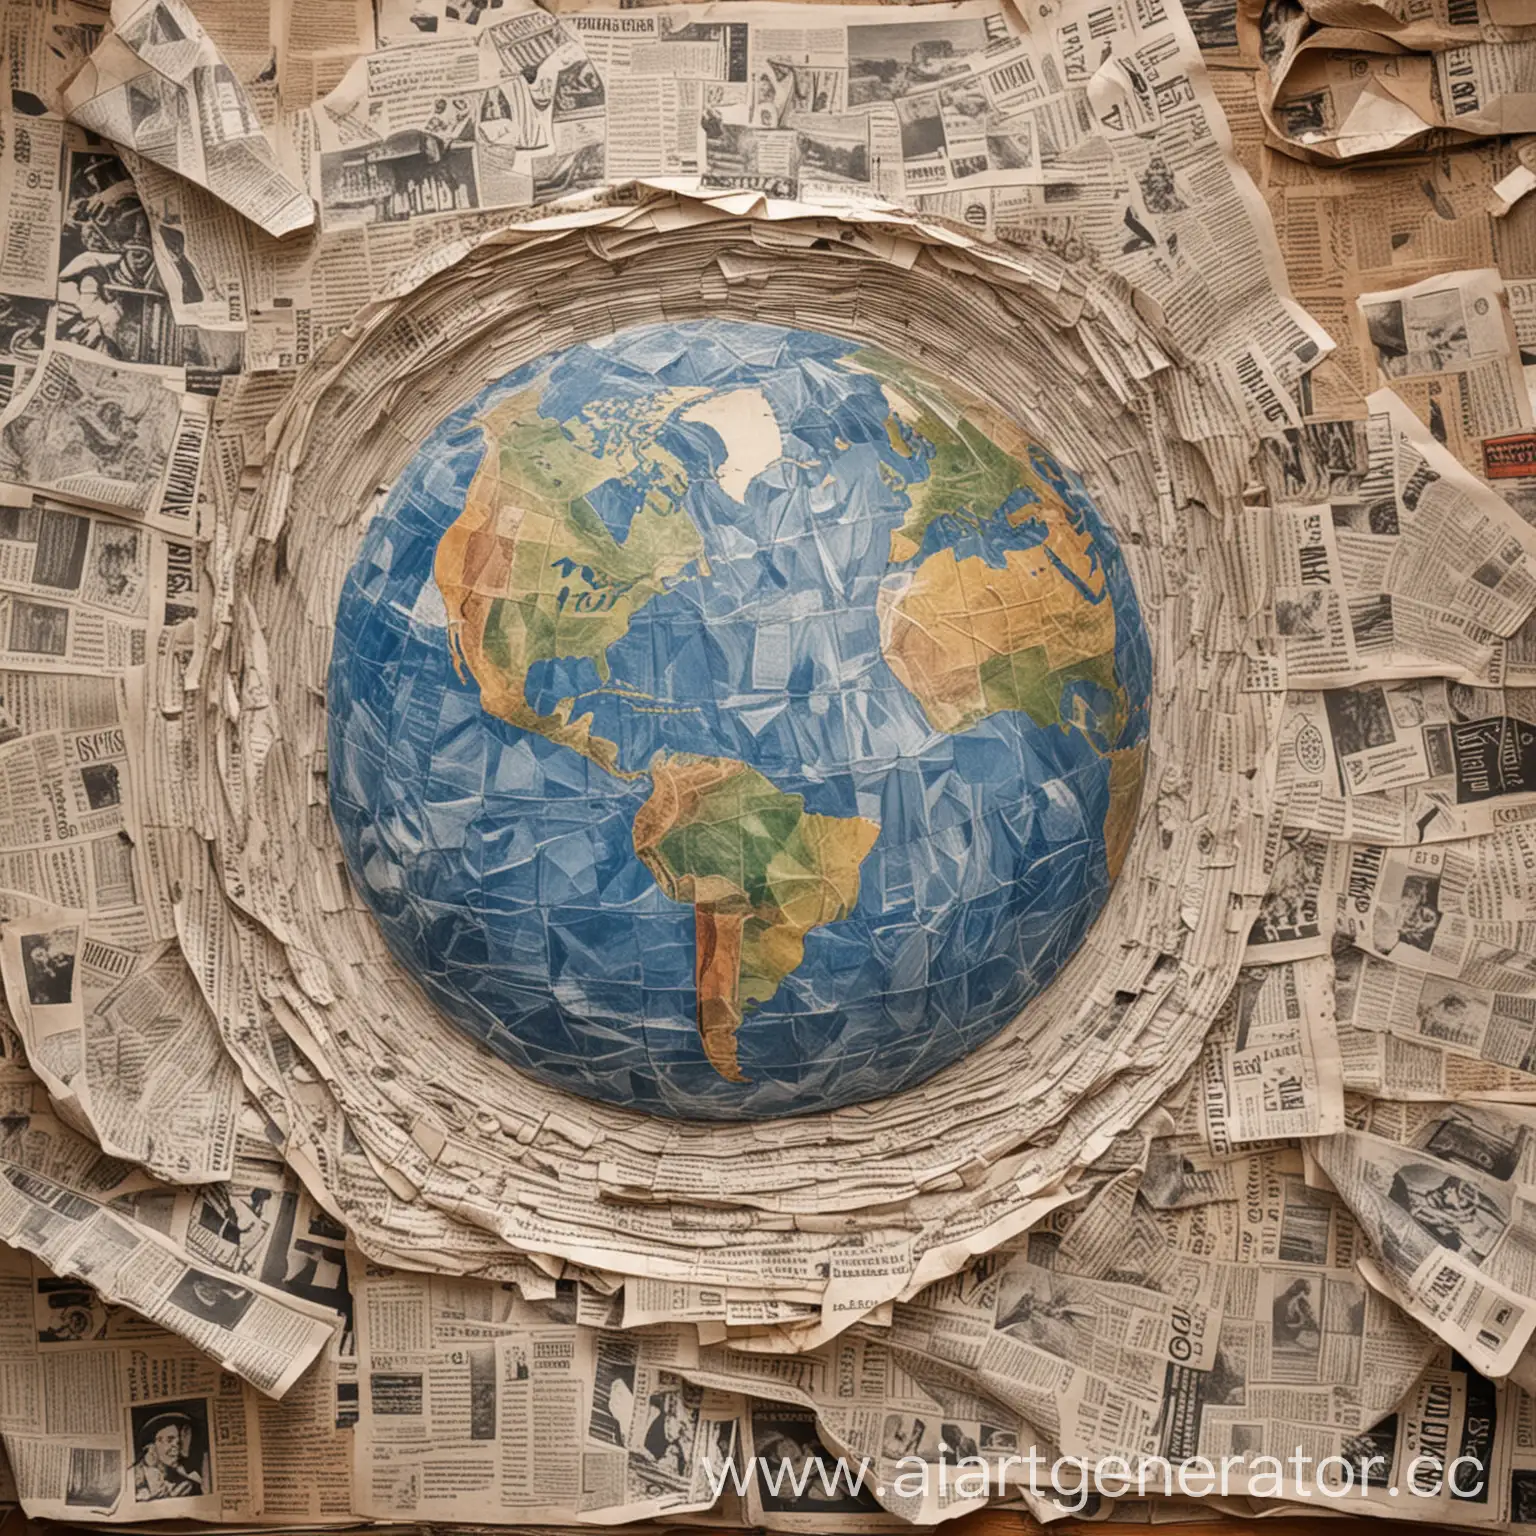 Creation-of-Earth-Drawings-on-Torn-Newspapers